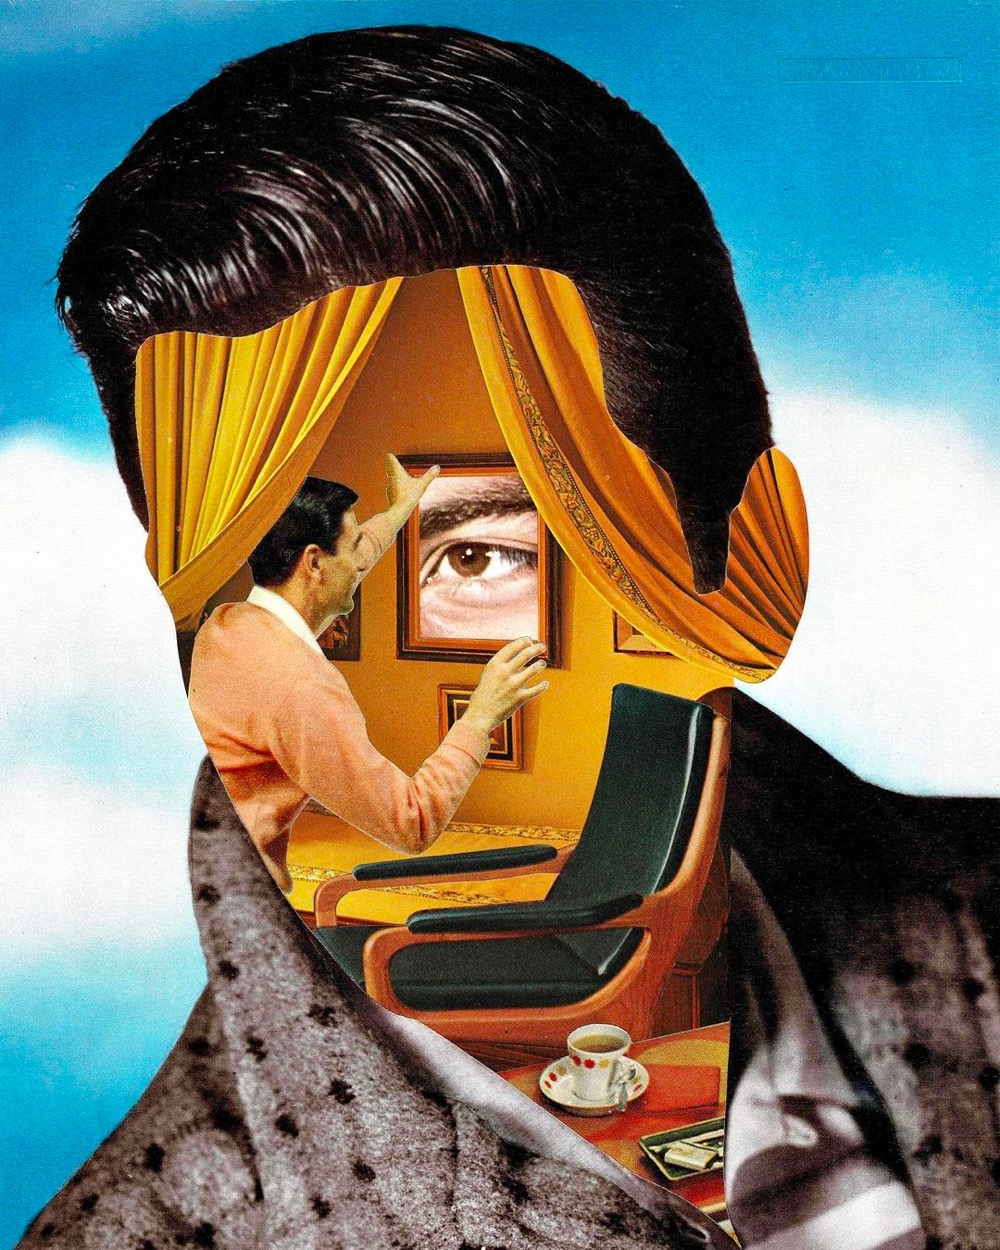 hand-cut collages with a face replaced with various other scenes/objects